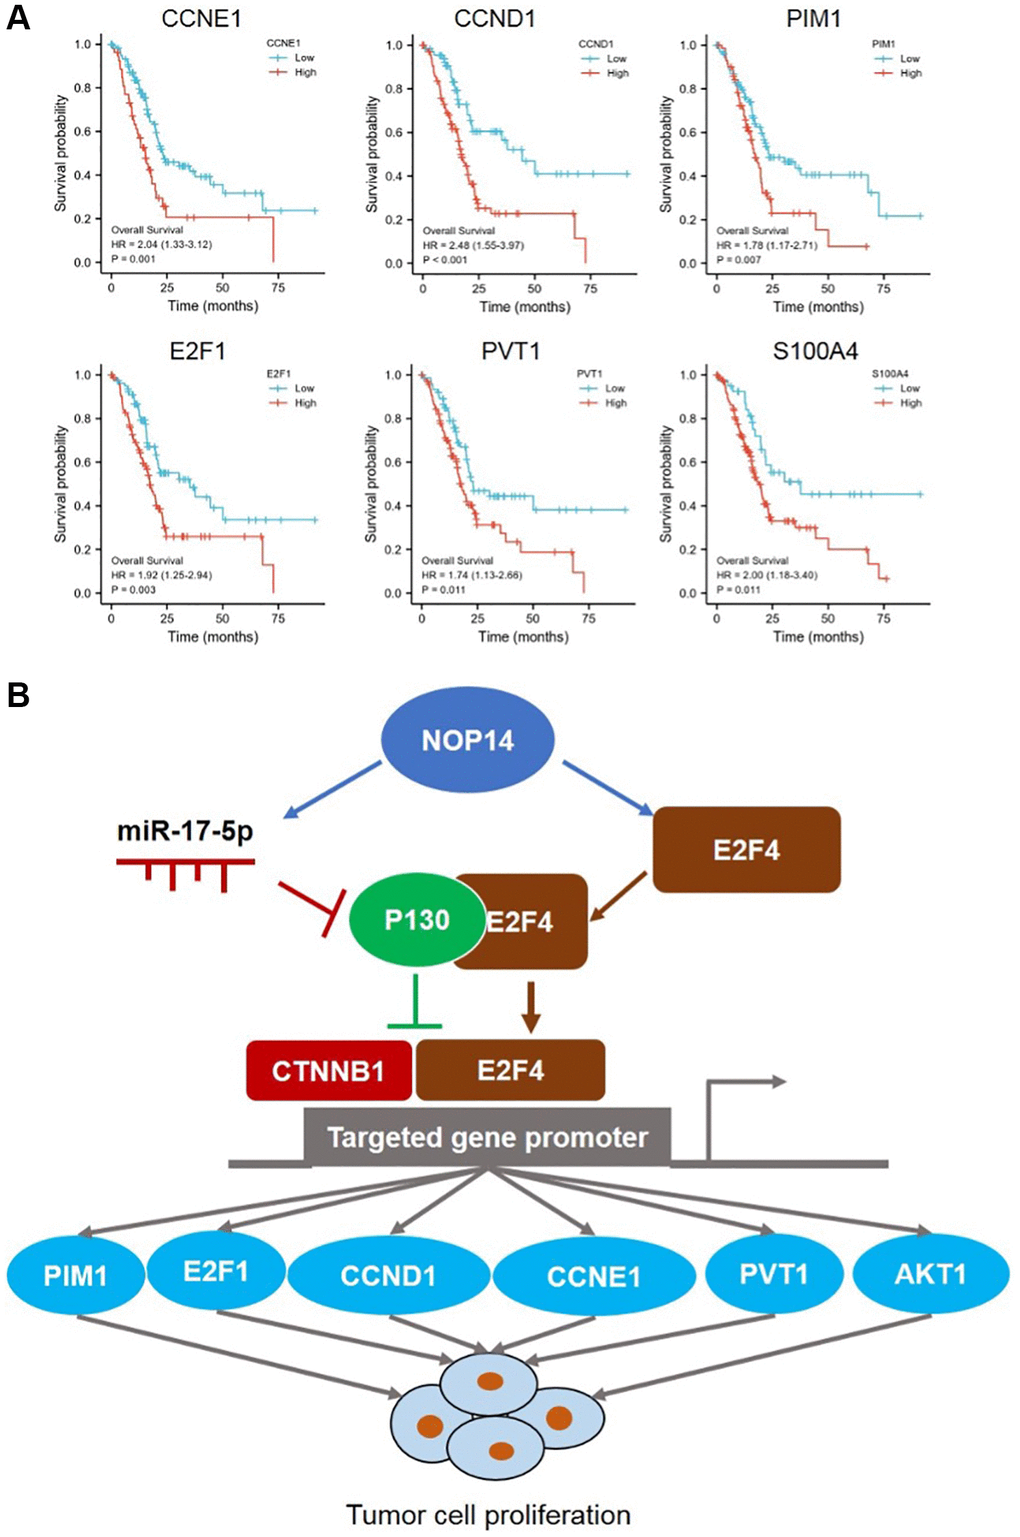 Prognostic value of NOP14-miR 17-5p and -E2F4 pathway and their regulatory diagram. (A) Kaplan–Meier survival analysis of NOP14 downstream targeted genes according to their expression in the TCGA pancreatic cancer dataset. The P value was obtained by Cox regression in R (version 3.6.3). (B) Schematic diagram showing the regulation of pancreatic cancer cell proliferation by the NOP14-miR 17-5p and -E2F4 pathway.